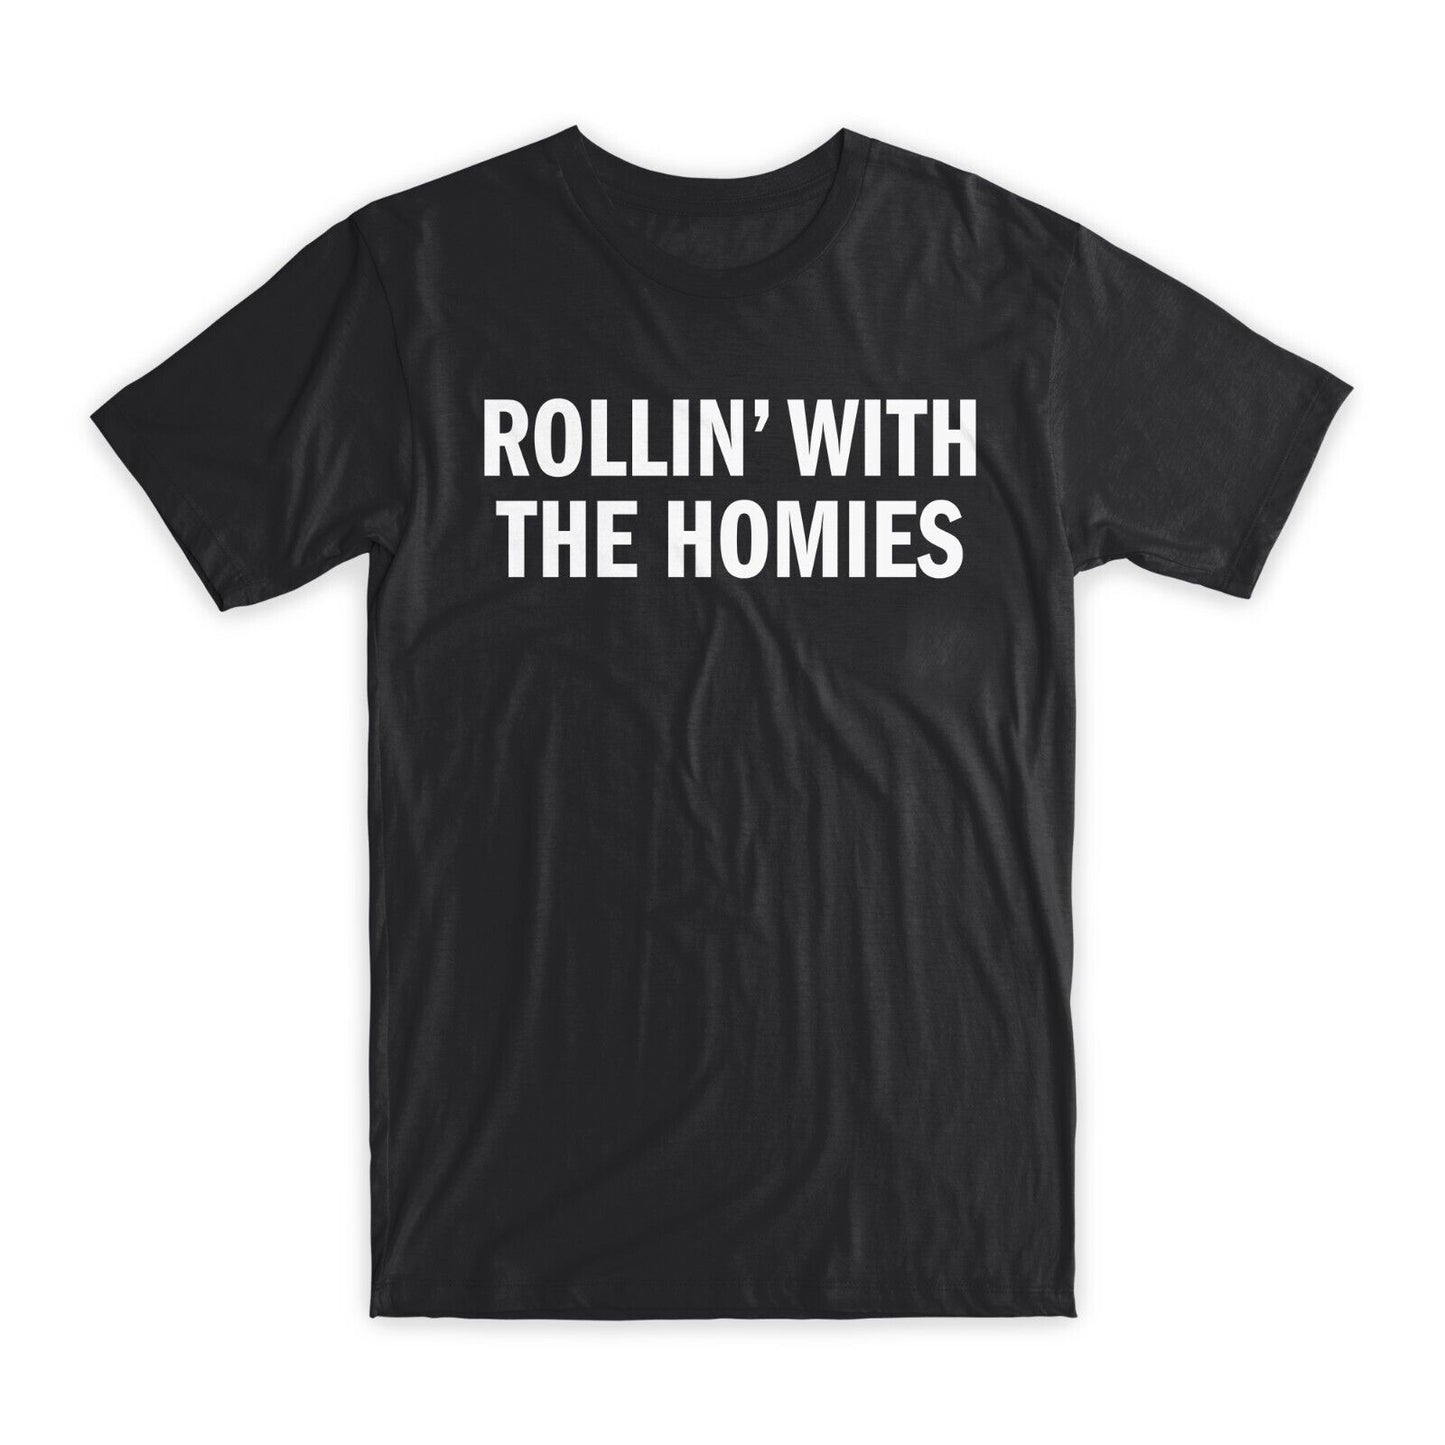 Rollin' with The Homies T-Shirt Premium Soft Cotton Crew Neck Funny Tee Gift NEW